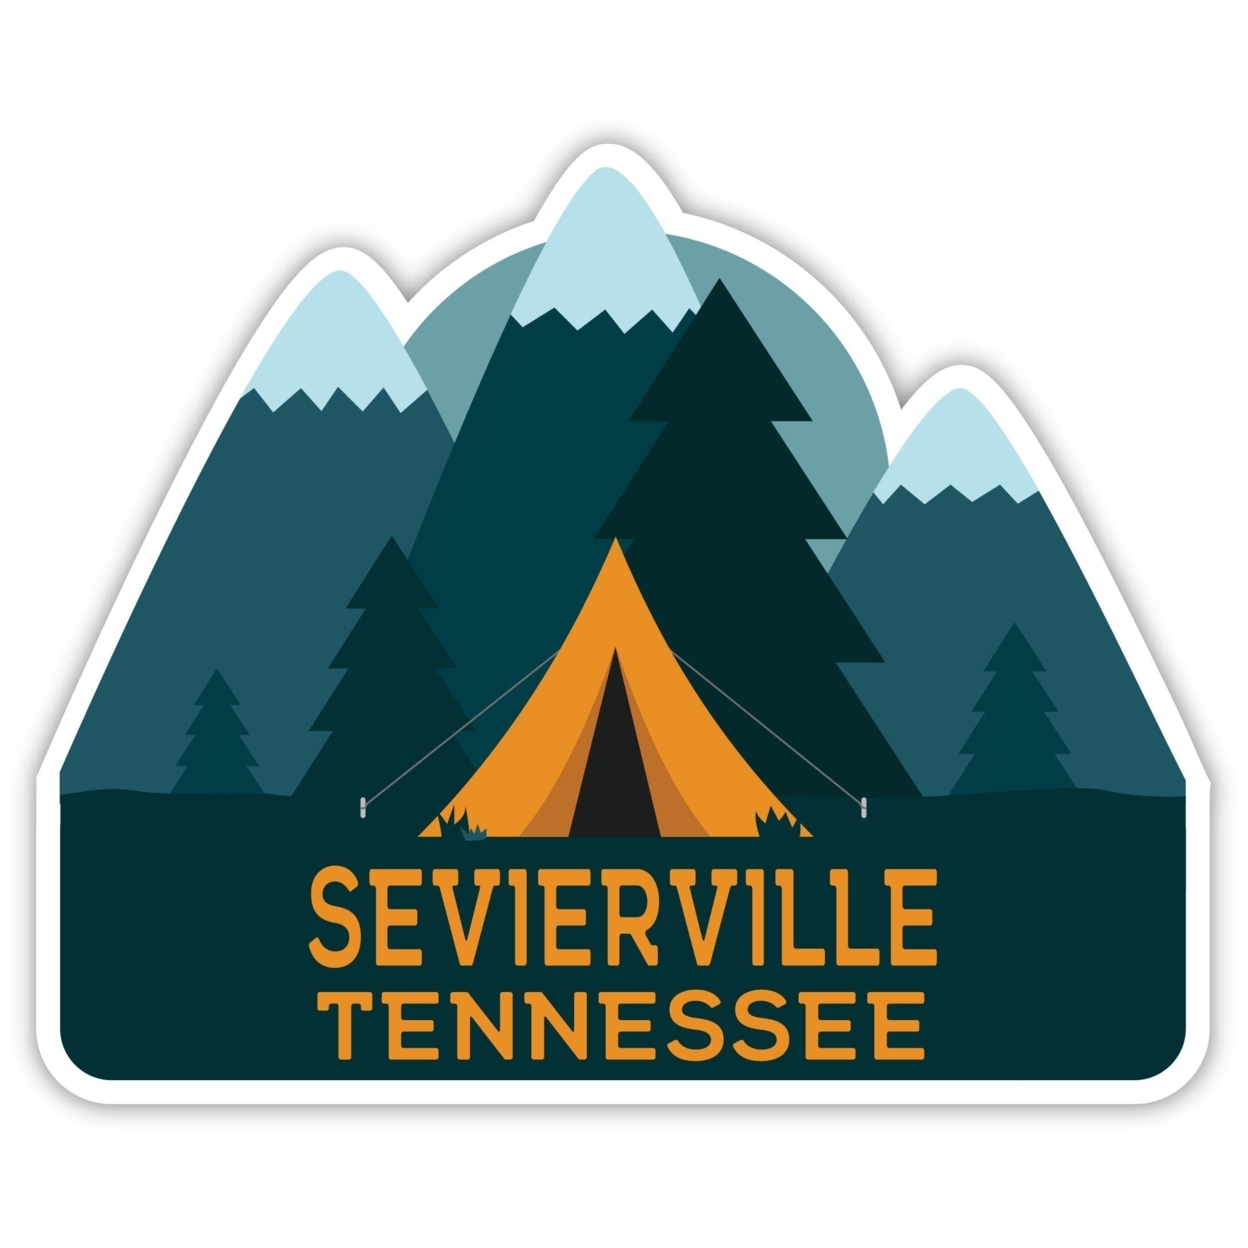 Sevierville Tennessee Souvenir Decorative Stickers (Choose Theme And Size) - Single Unit, 4-Inch, Bear